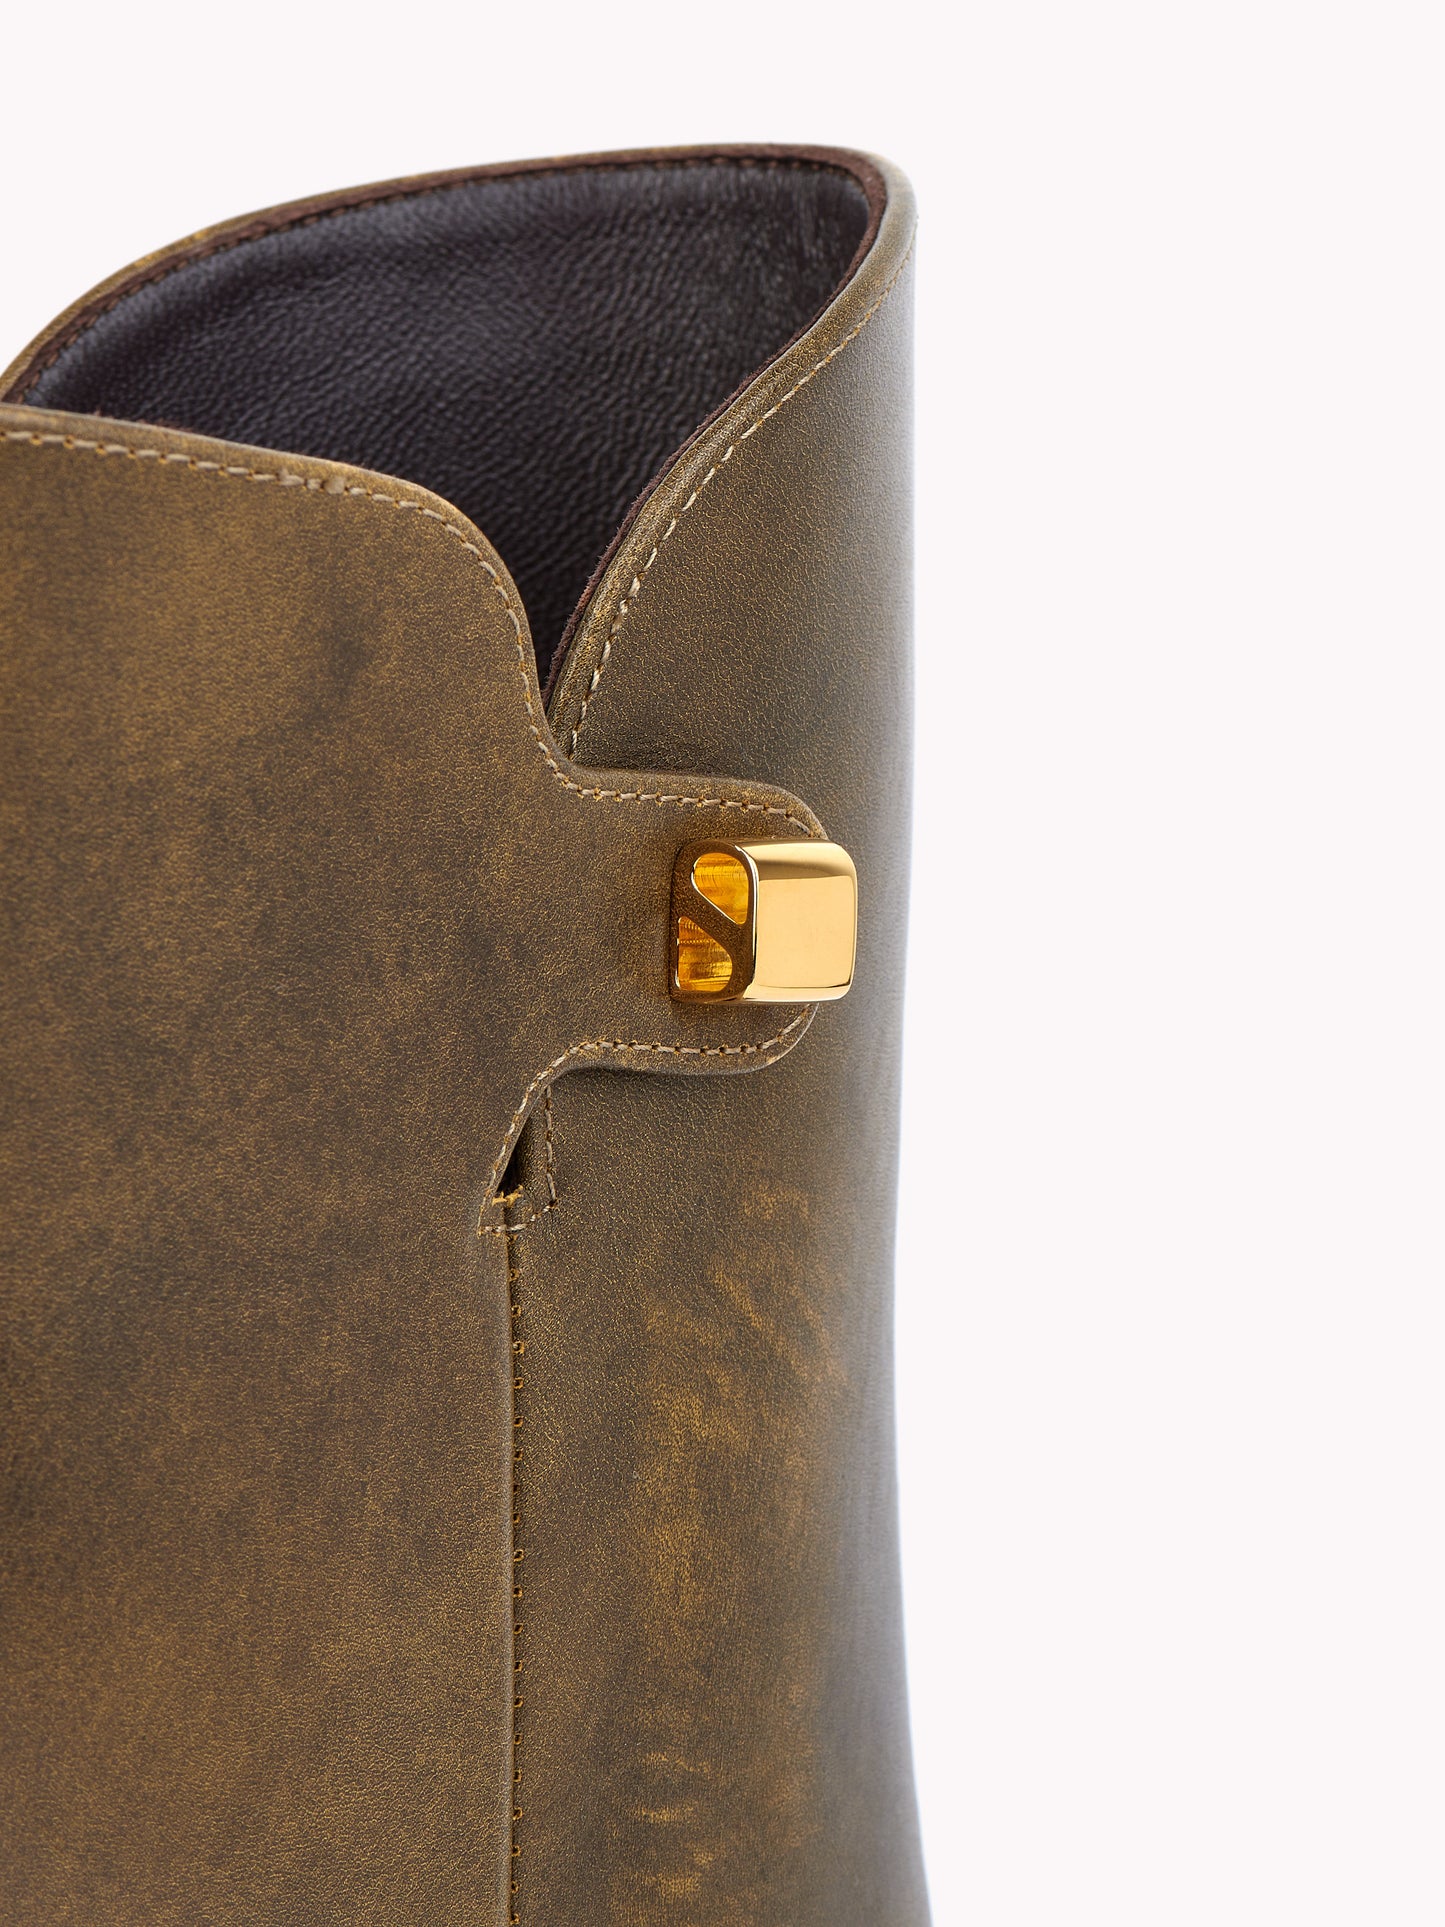 Skorpios sophisticated golden brown leather boots